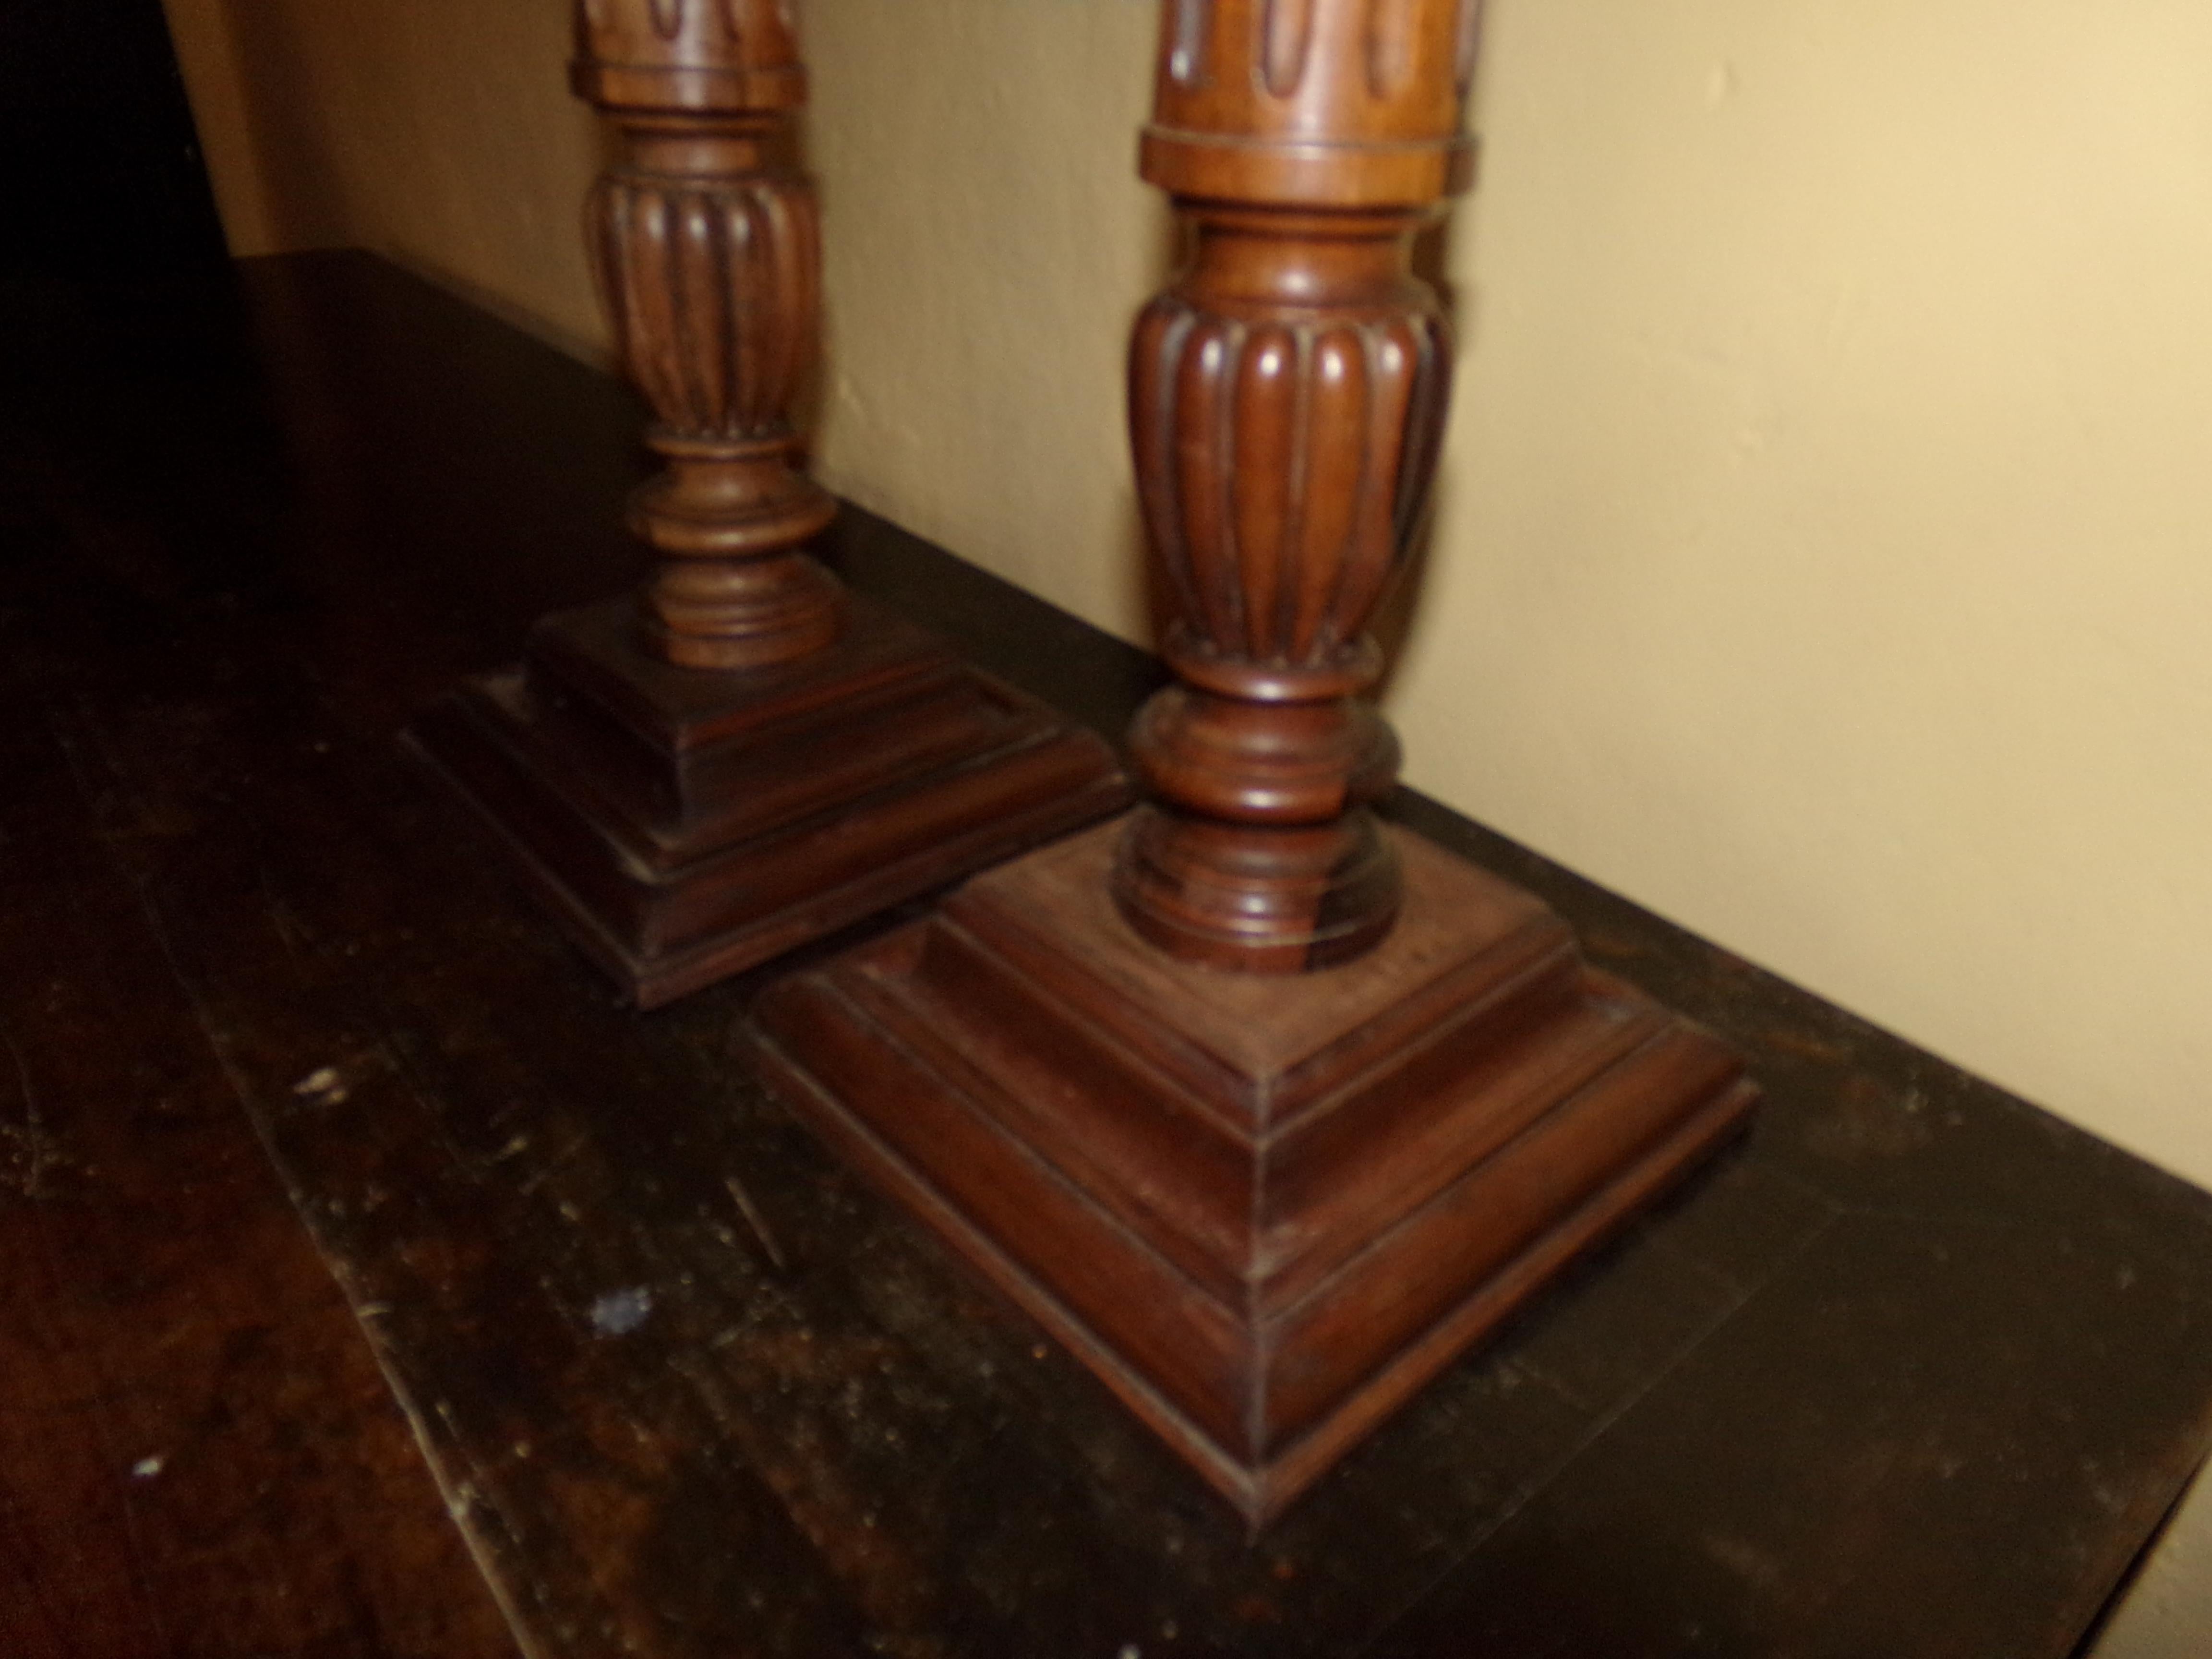 A super pair of turned and fluted hand carved pricket walnut torchiers or candlesticks in the Louis XVI style beautifully crafted from original circa 1890s wood turnings. Our craftsman has retained all the original patination. A beautiful holiday